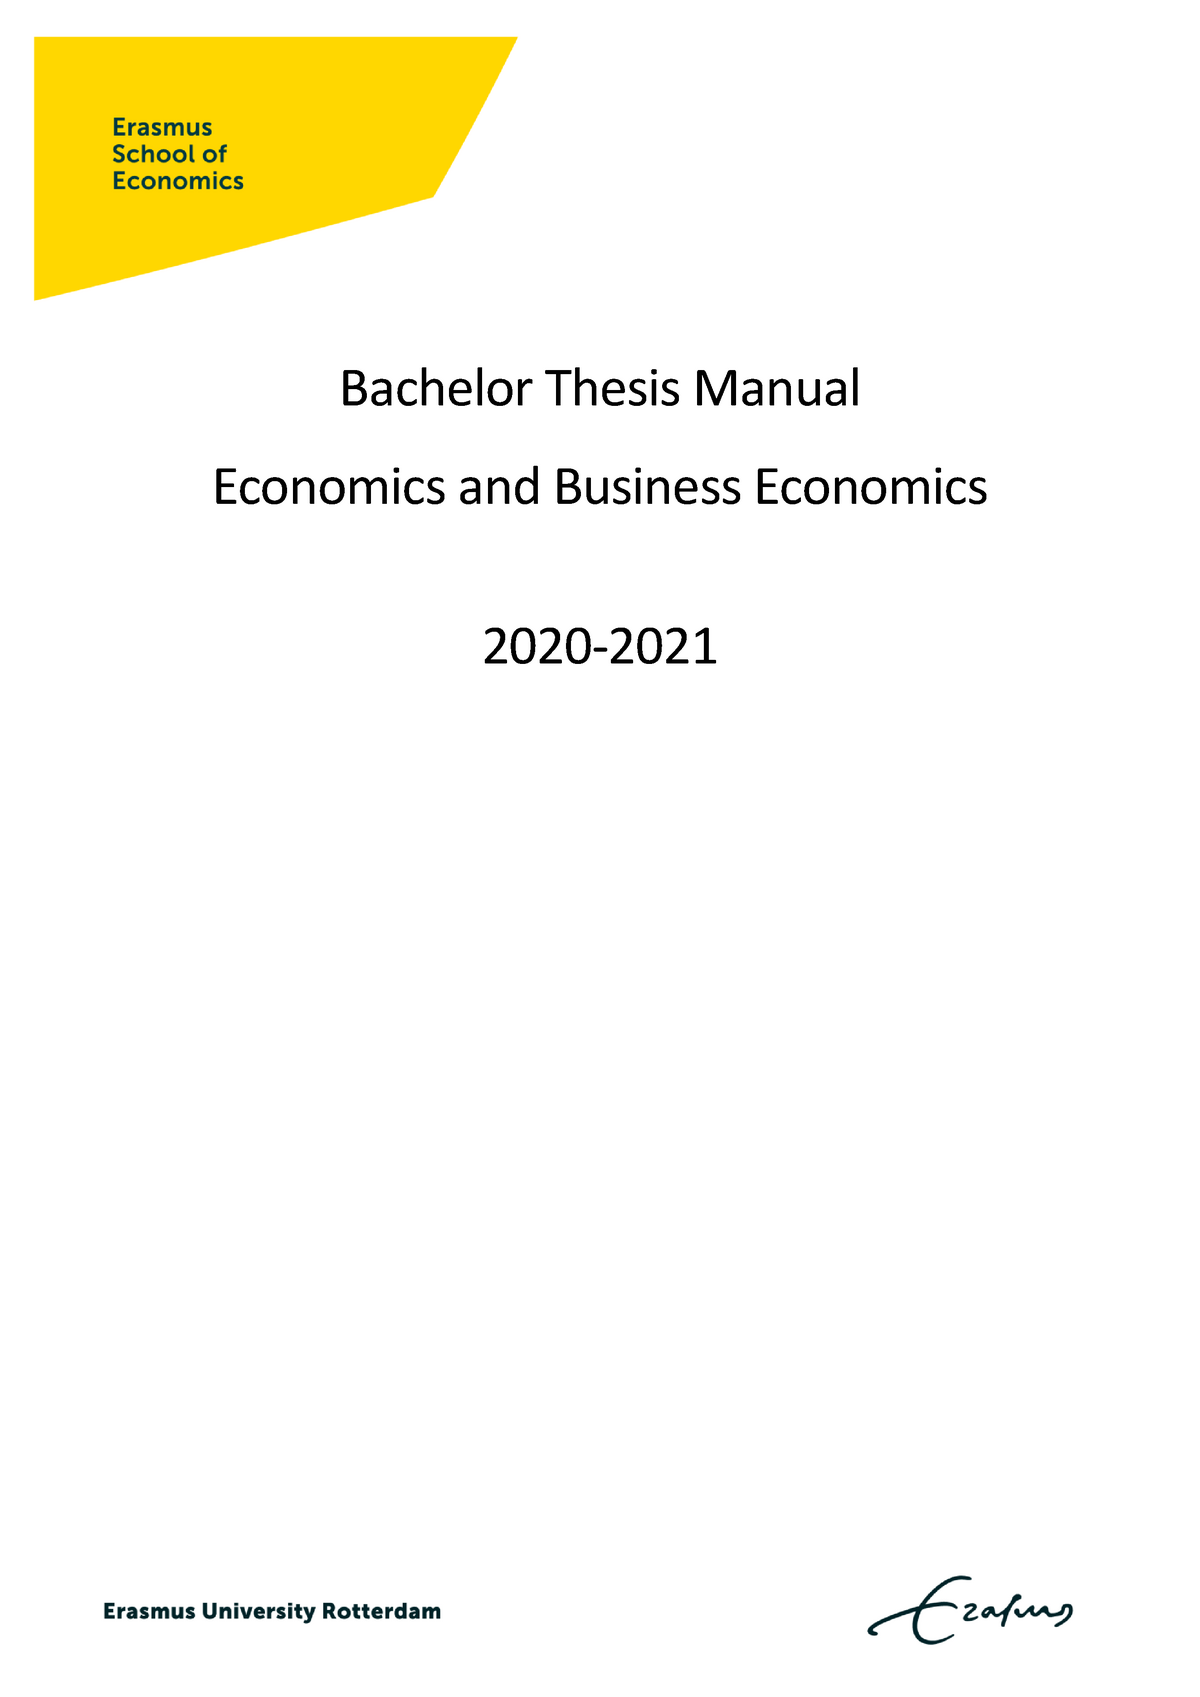 buy bachelor thesis online